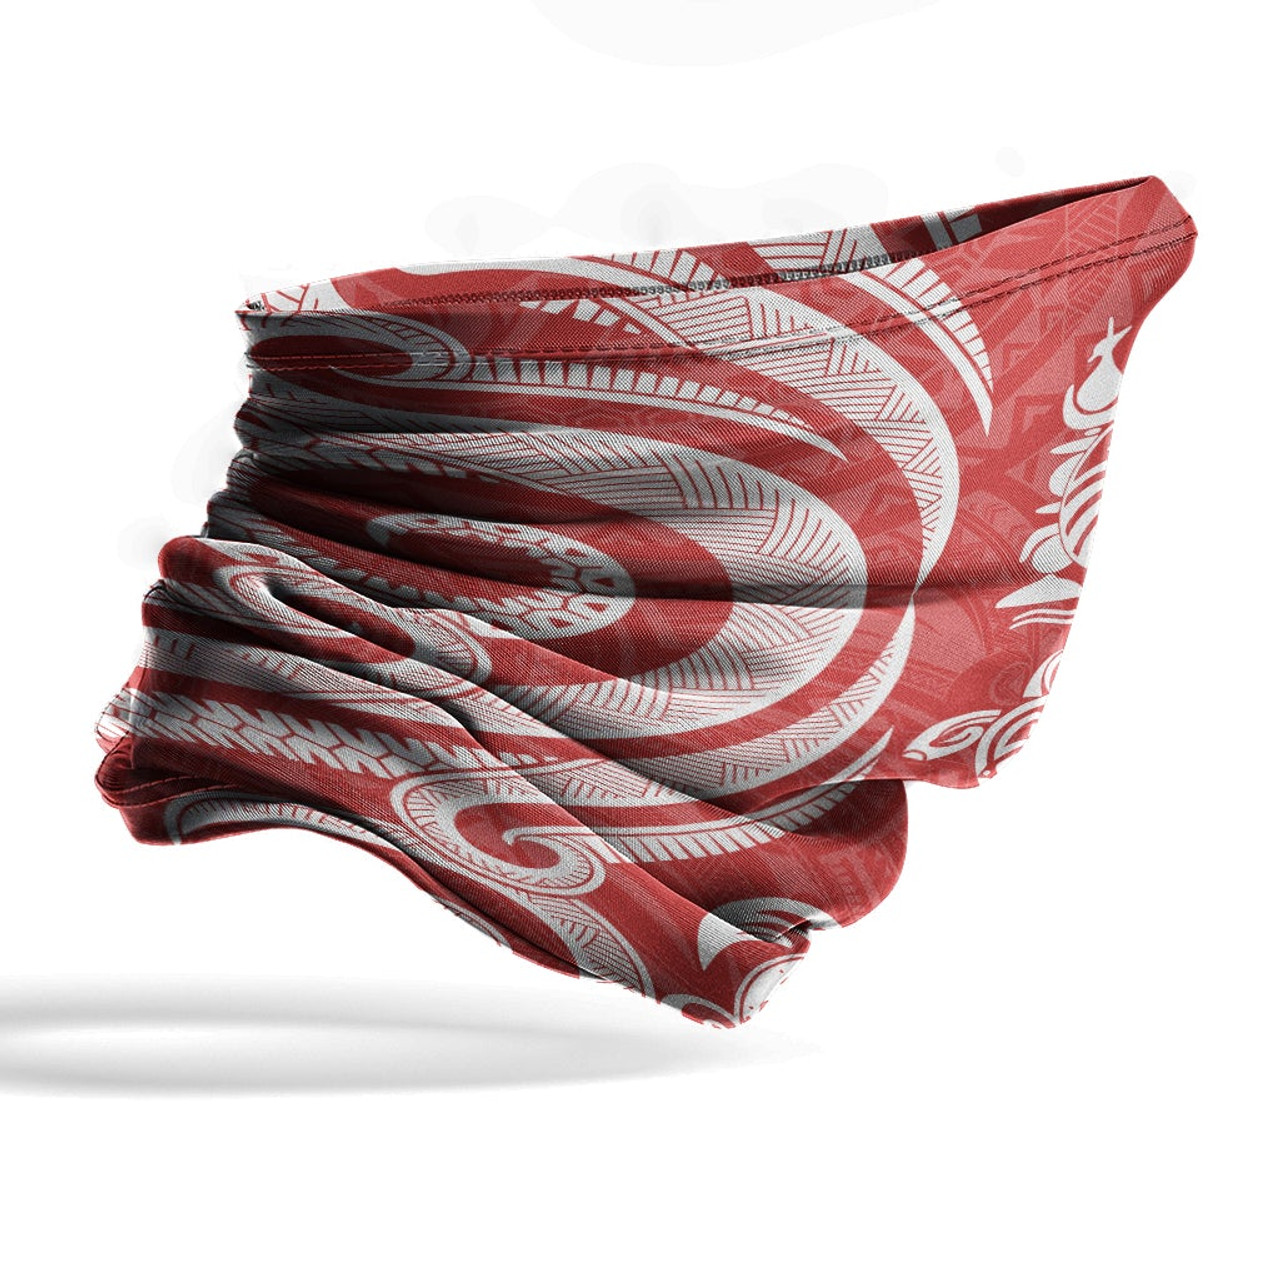 New Caledonia Neck Gaiter - Turtle Tentacle White Red 4